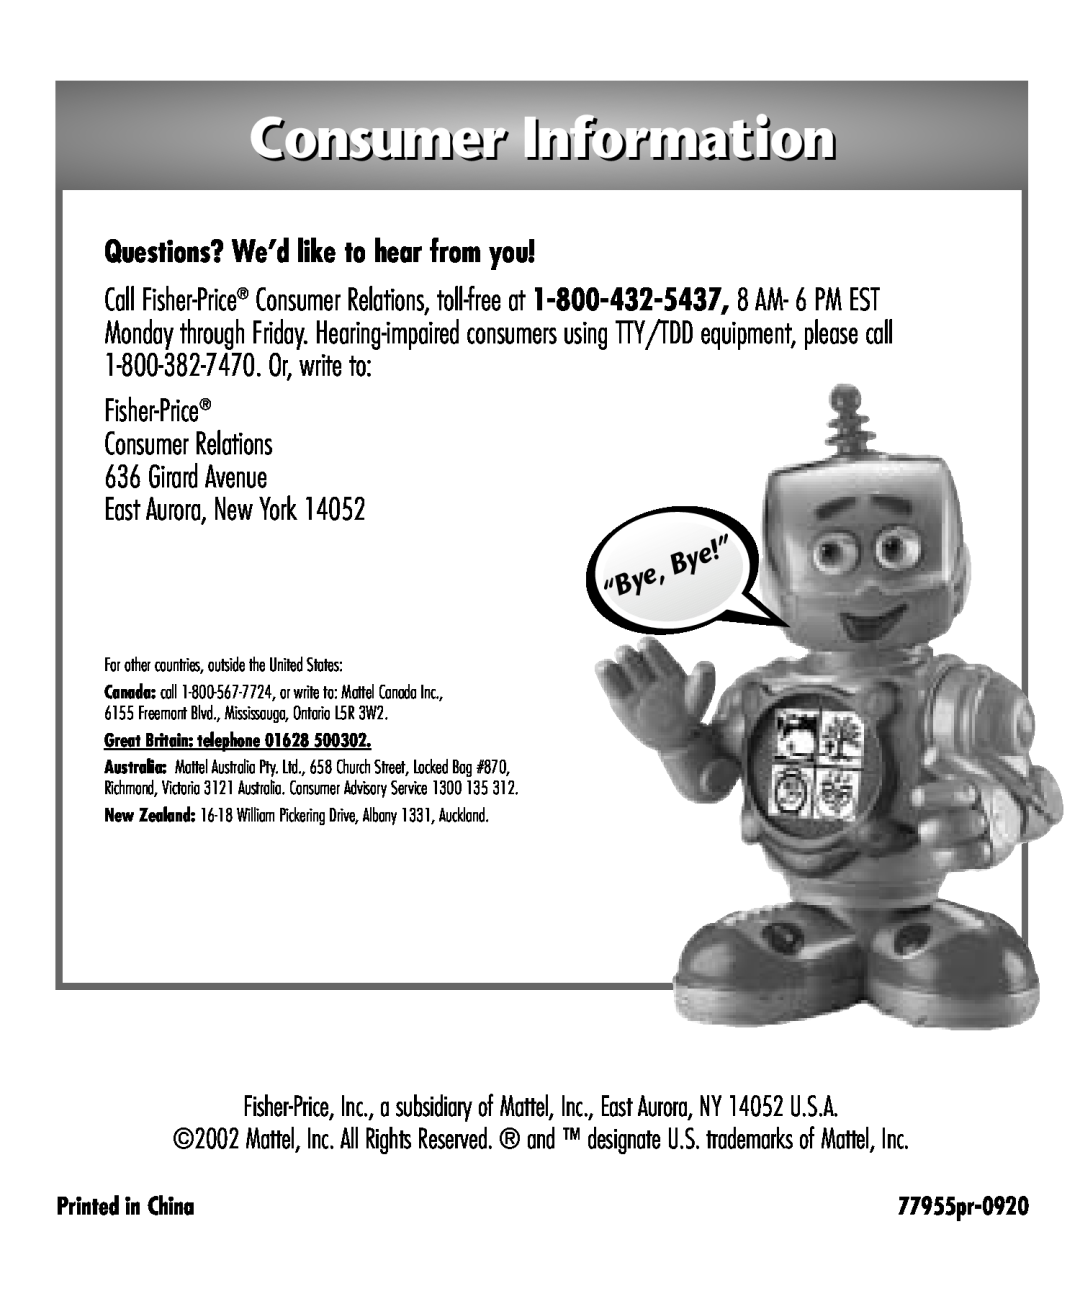 Fisher-Price Baby Toy Consumer Information, Questions? We’d like to hear from you, East Aurora, New York, Printed in China 